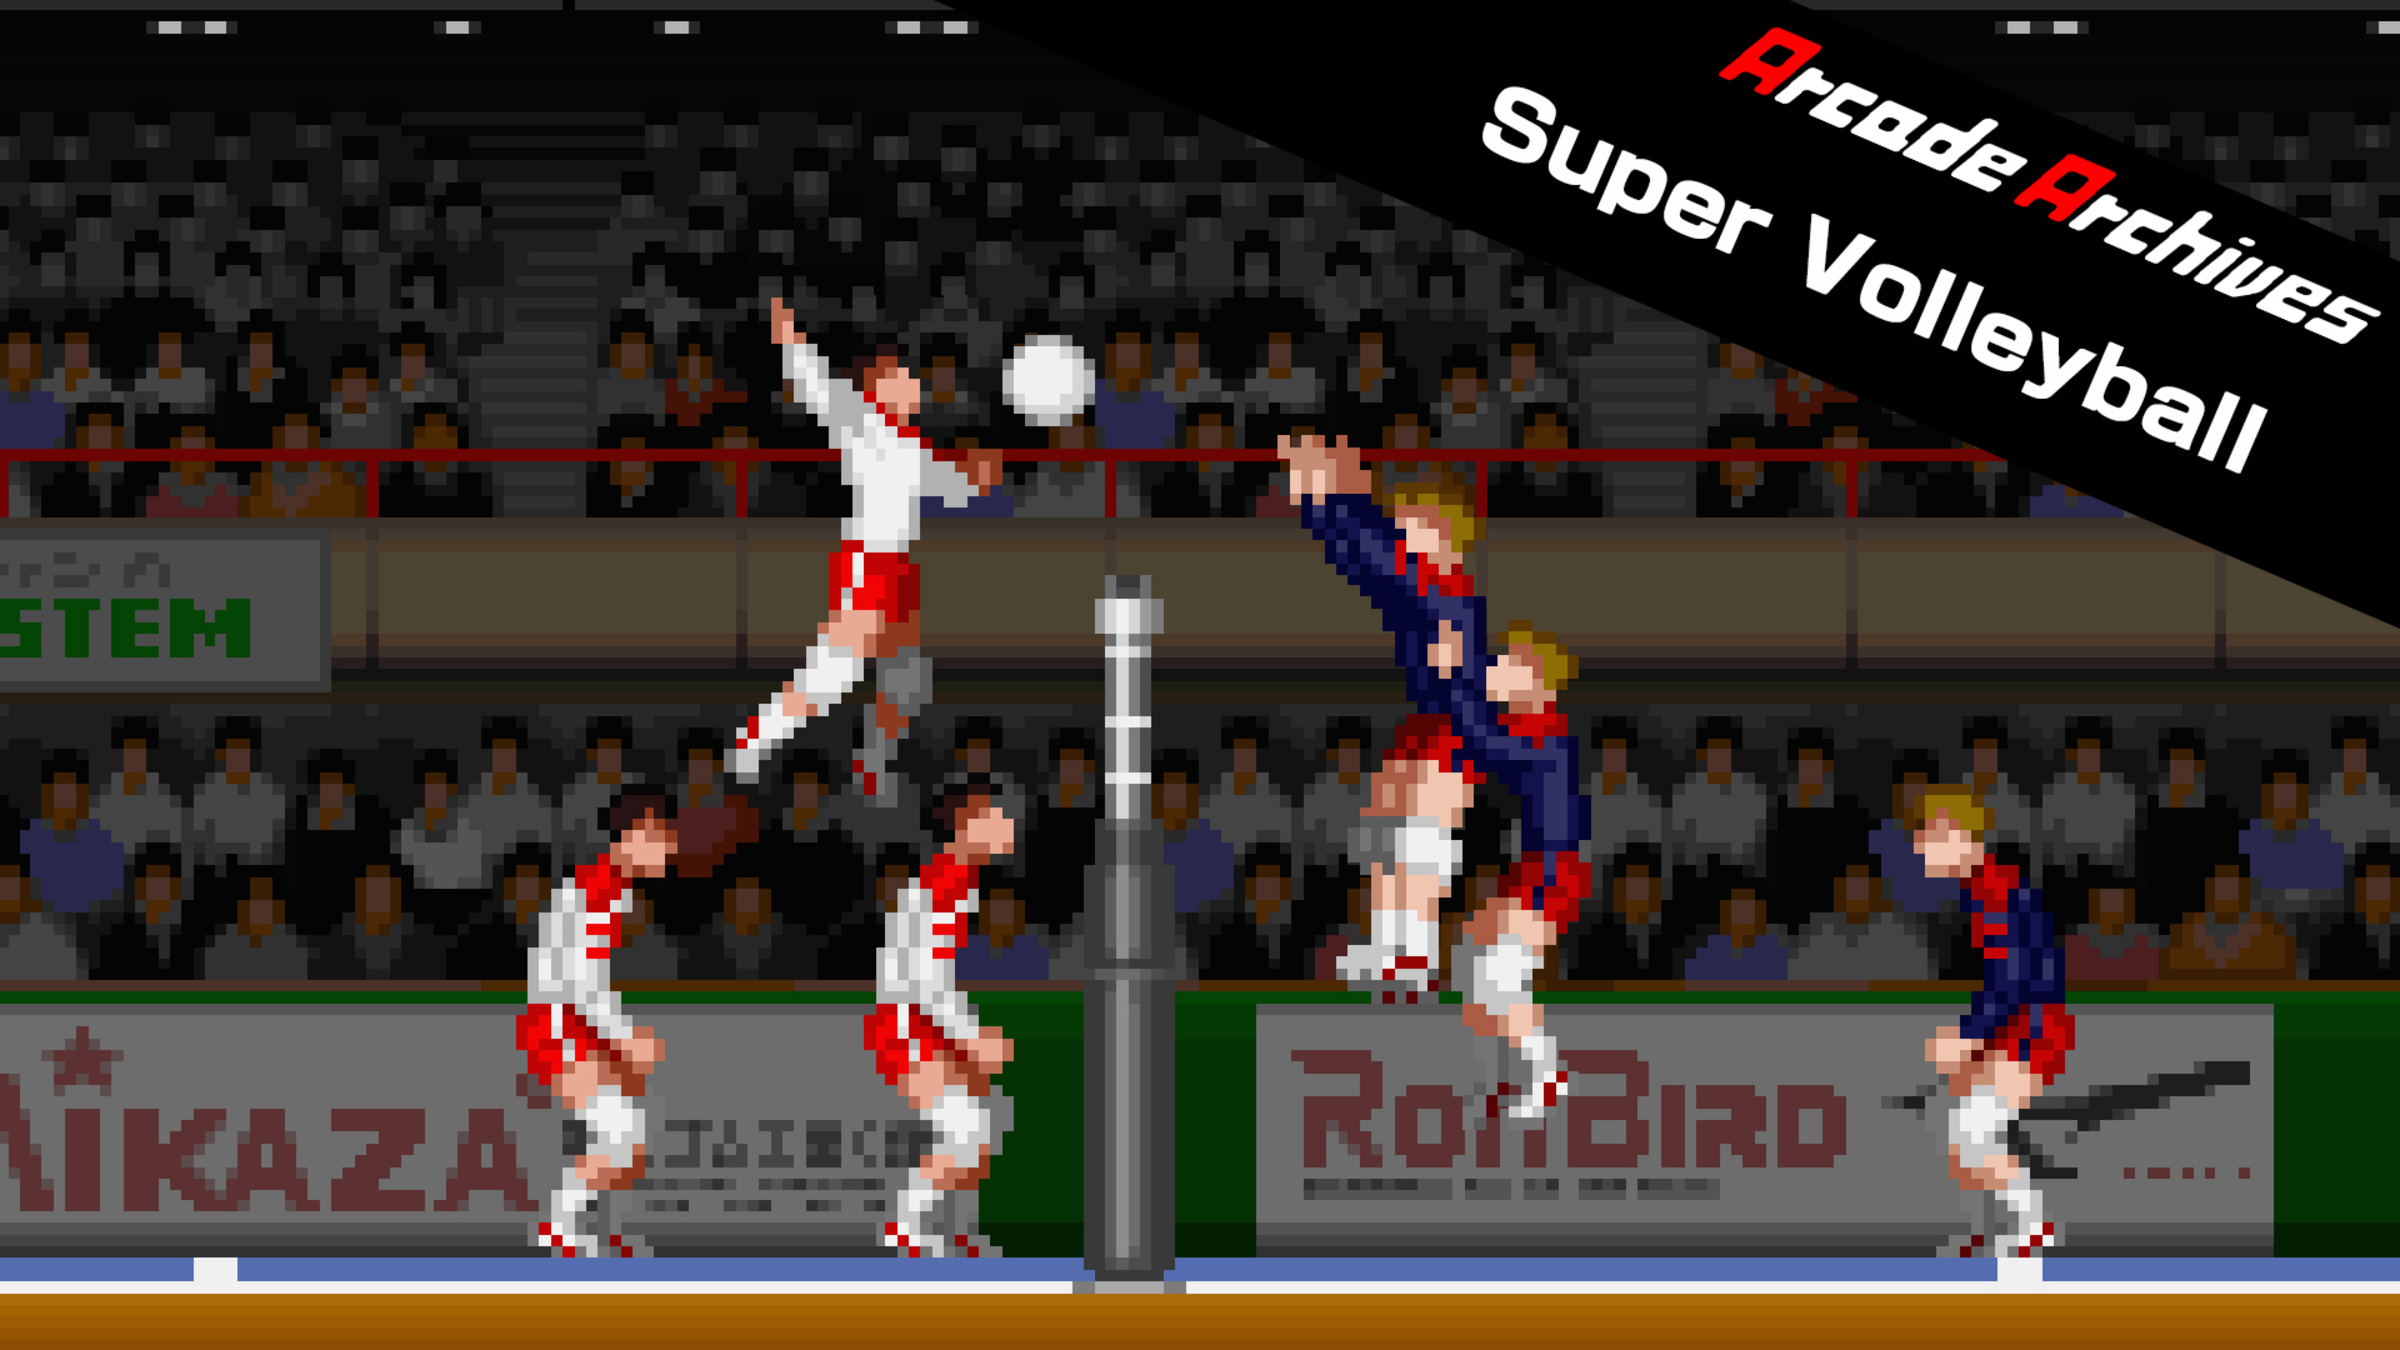 Arcade Archives Super Volleyball for Nintendo Switch